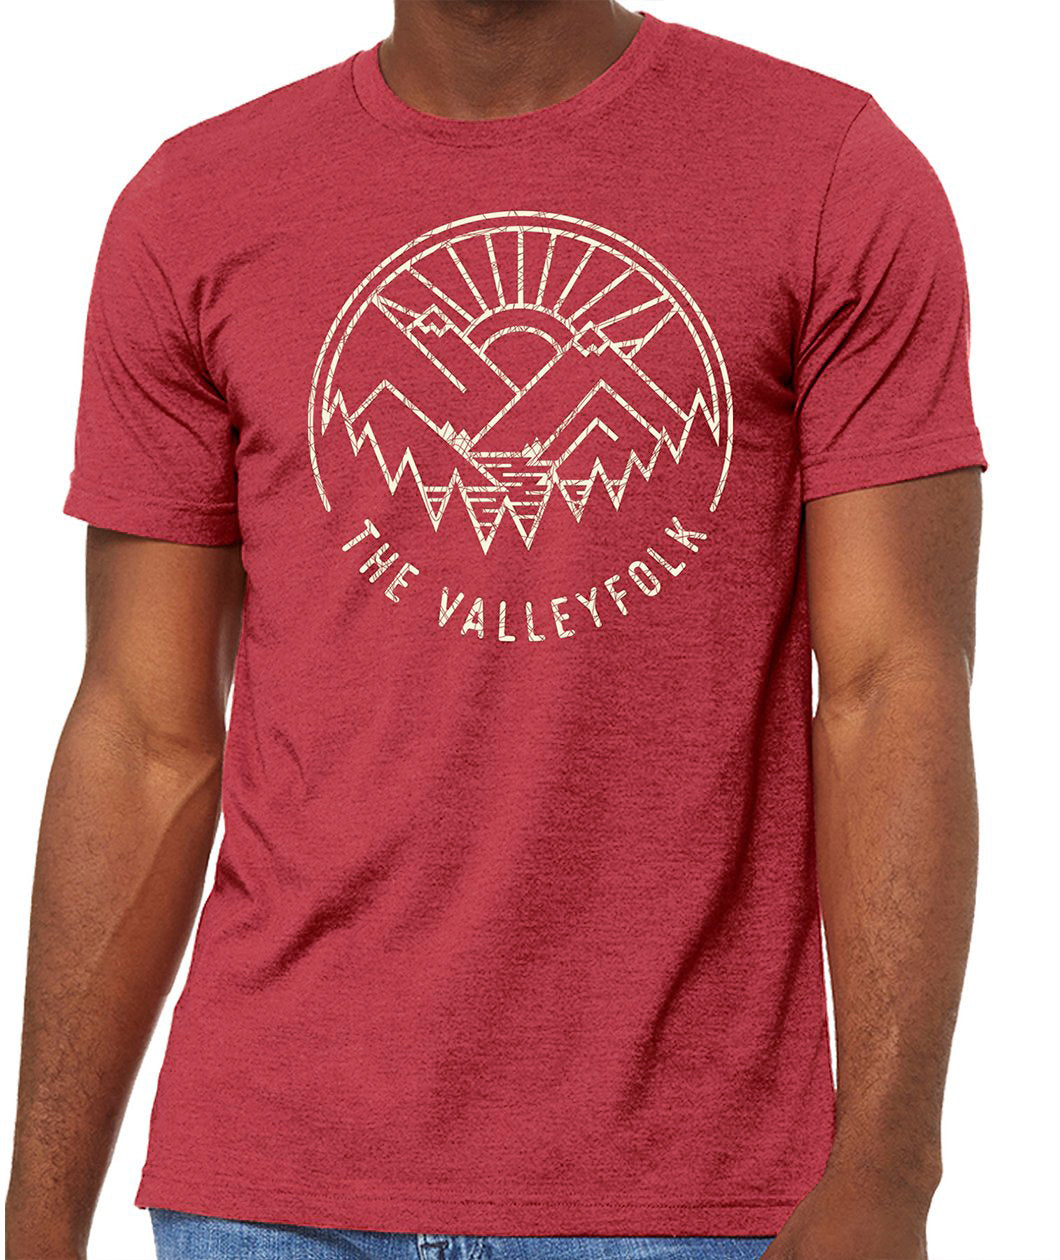 A red shirt with a distressed circular logo of a white outline of mountains, a lake, trees, and a sun rising. “The Valleyfolk” is arched at the bottom in white sans serif font - from the Valleyfolk